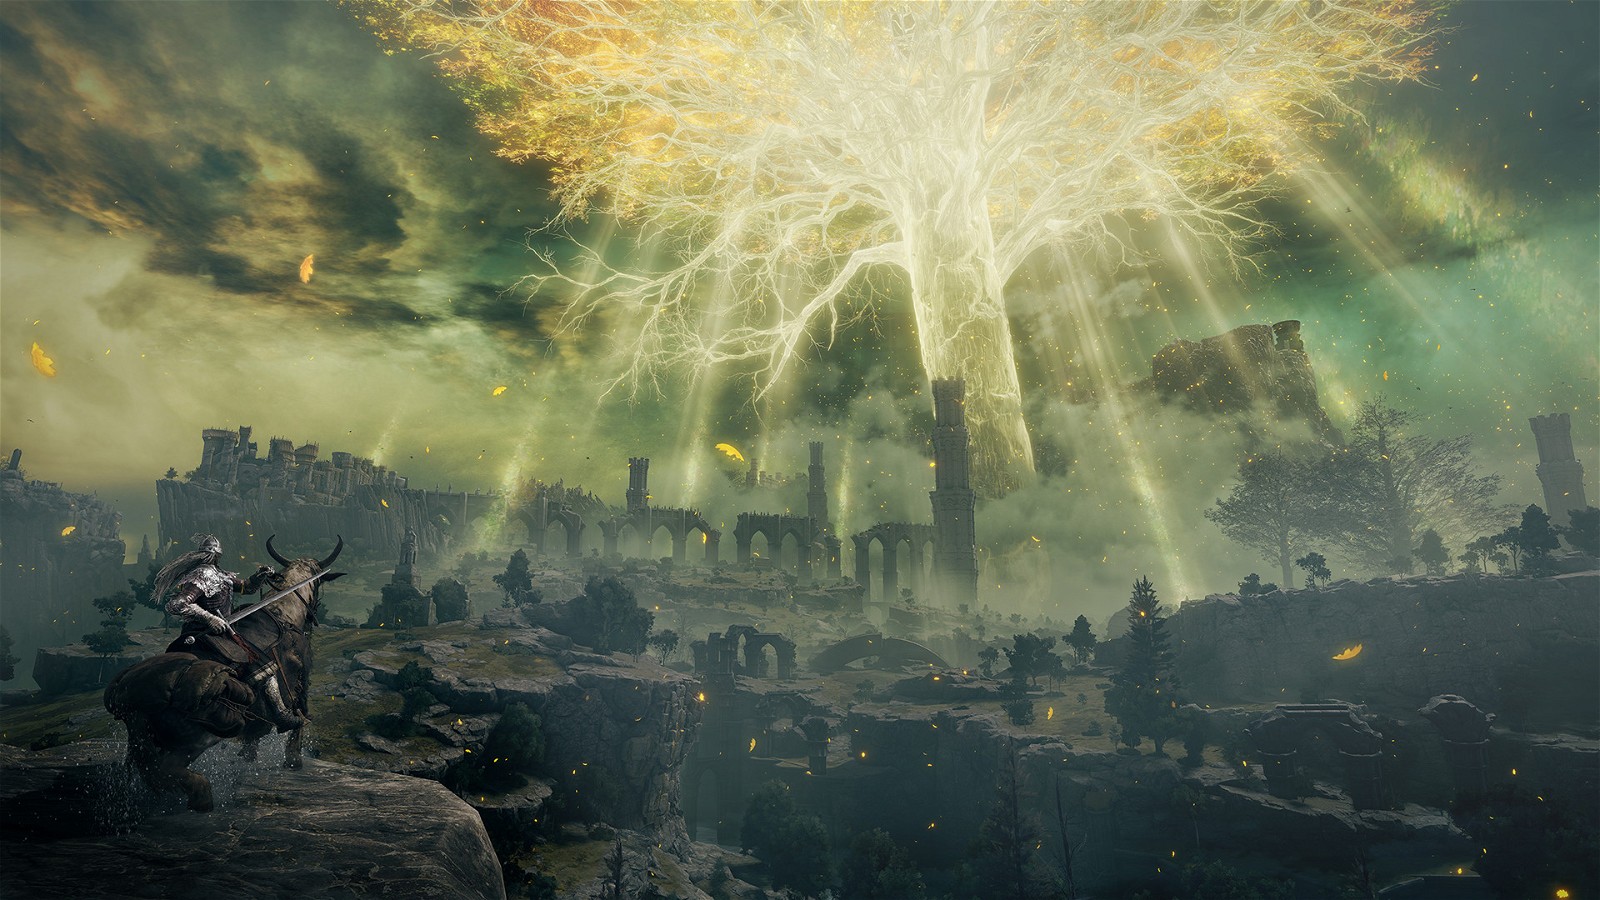 The Erdtree is one of the greatest sights in Elden Ring. Image credit: FromSoftware